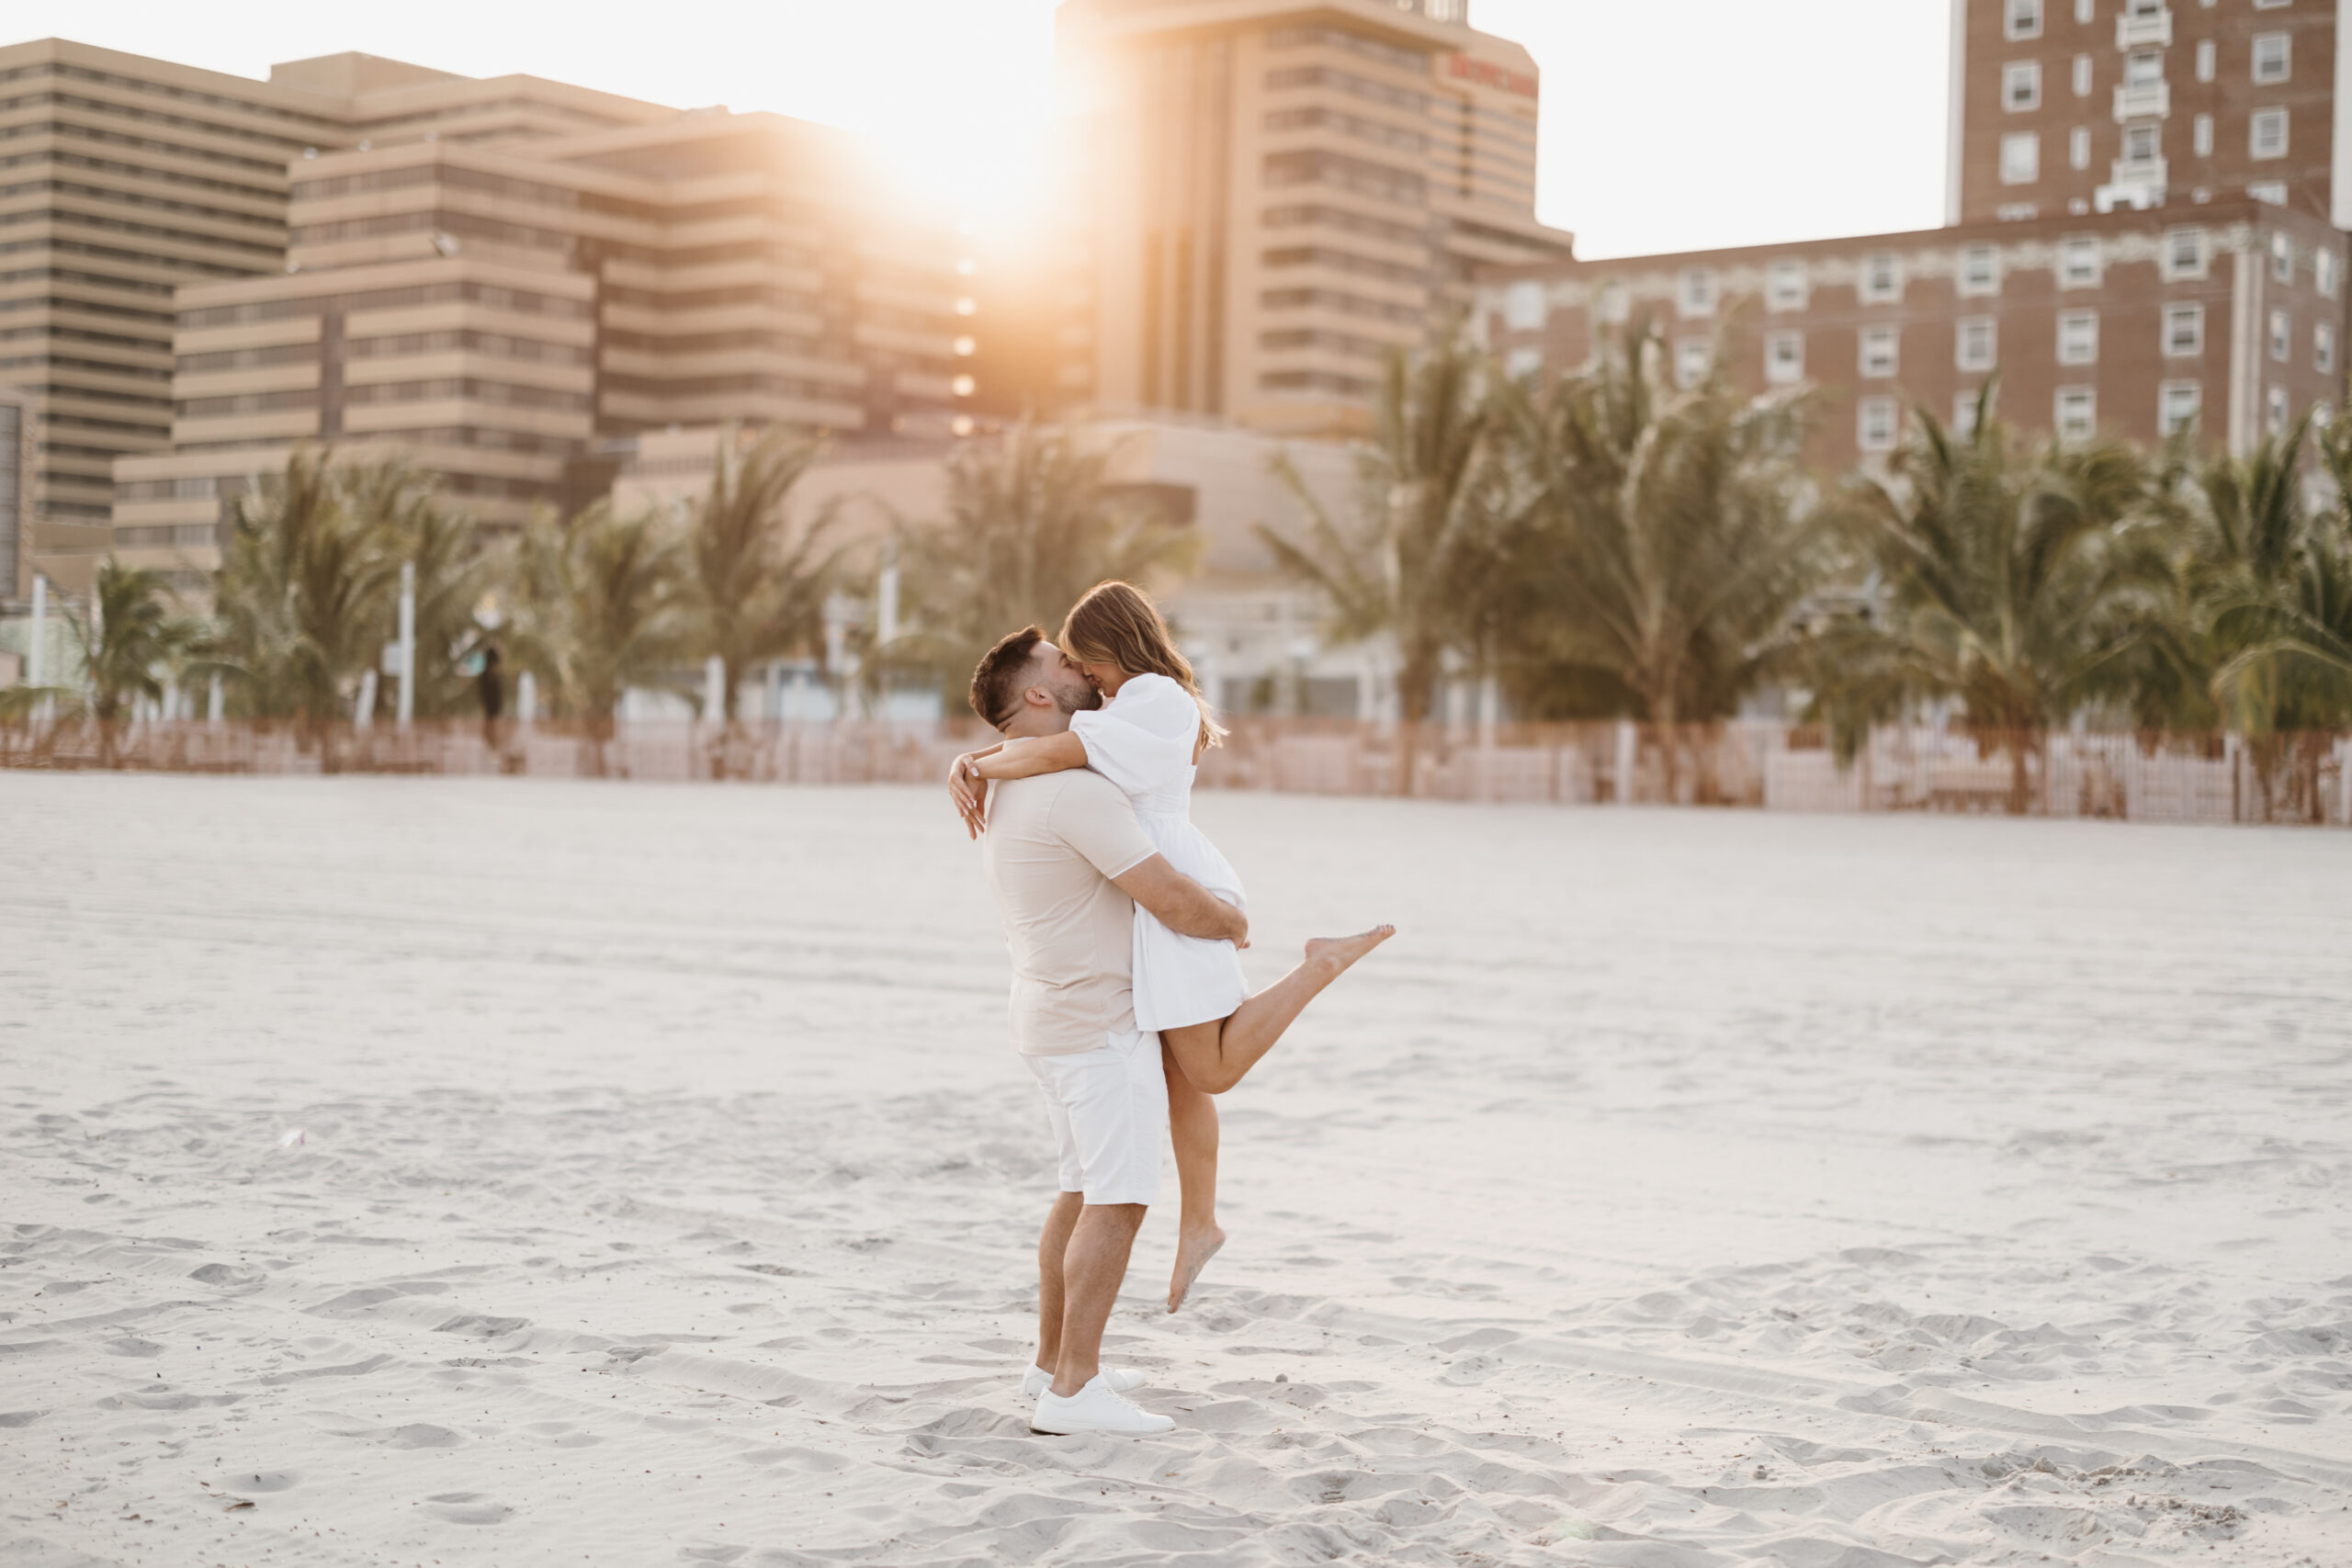 I just had the most amazing engagement photo session with this awesome couple, Alyssa and Vincent, and I can't wait to tell you all about it. We spent an evening in Atlantic City, and let me tell you, the sunset was absolutely breathtaking. The sky was painted with hues of orange, pink, and purple, creating the perfect backdrop for these lovebirds.